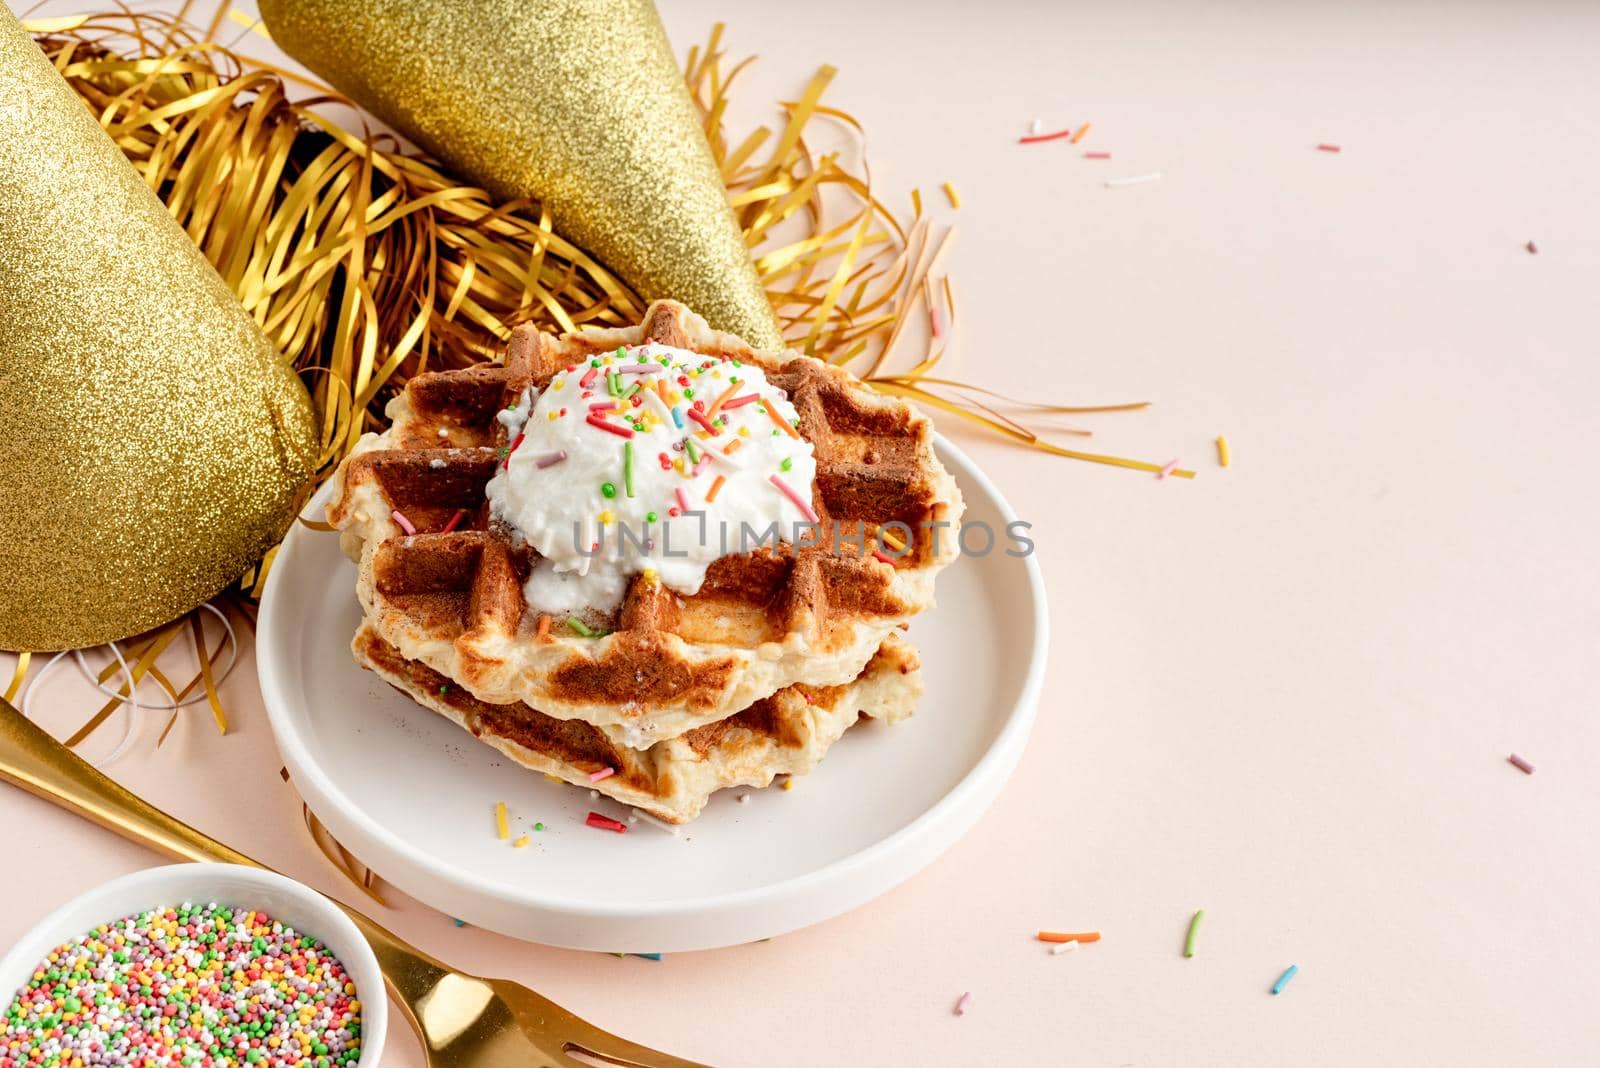 Birthday party waffles decorated with youghurt and colorful sprinkles